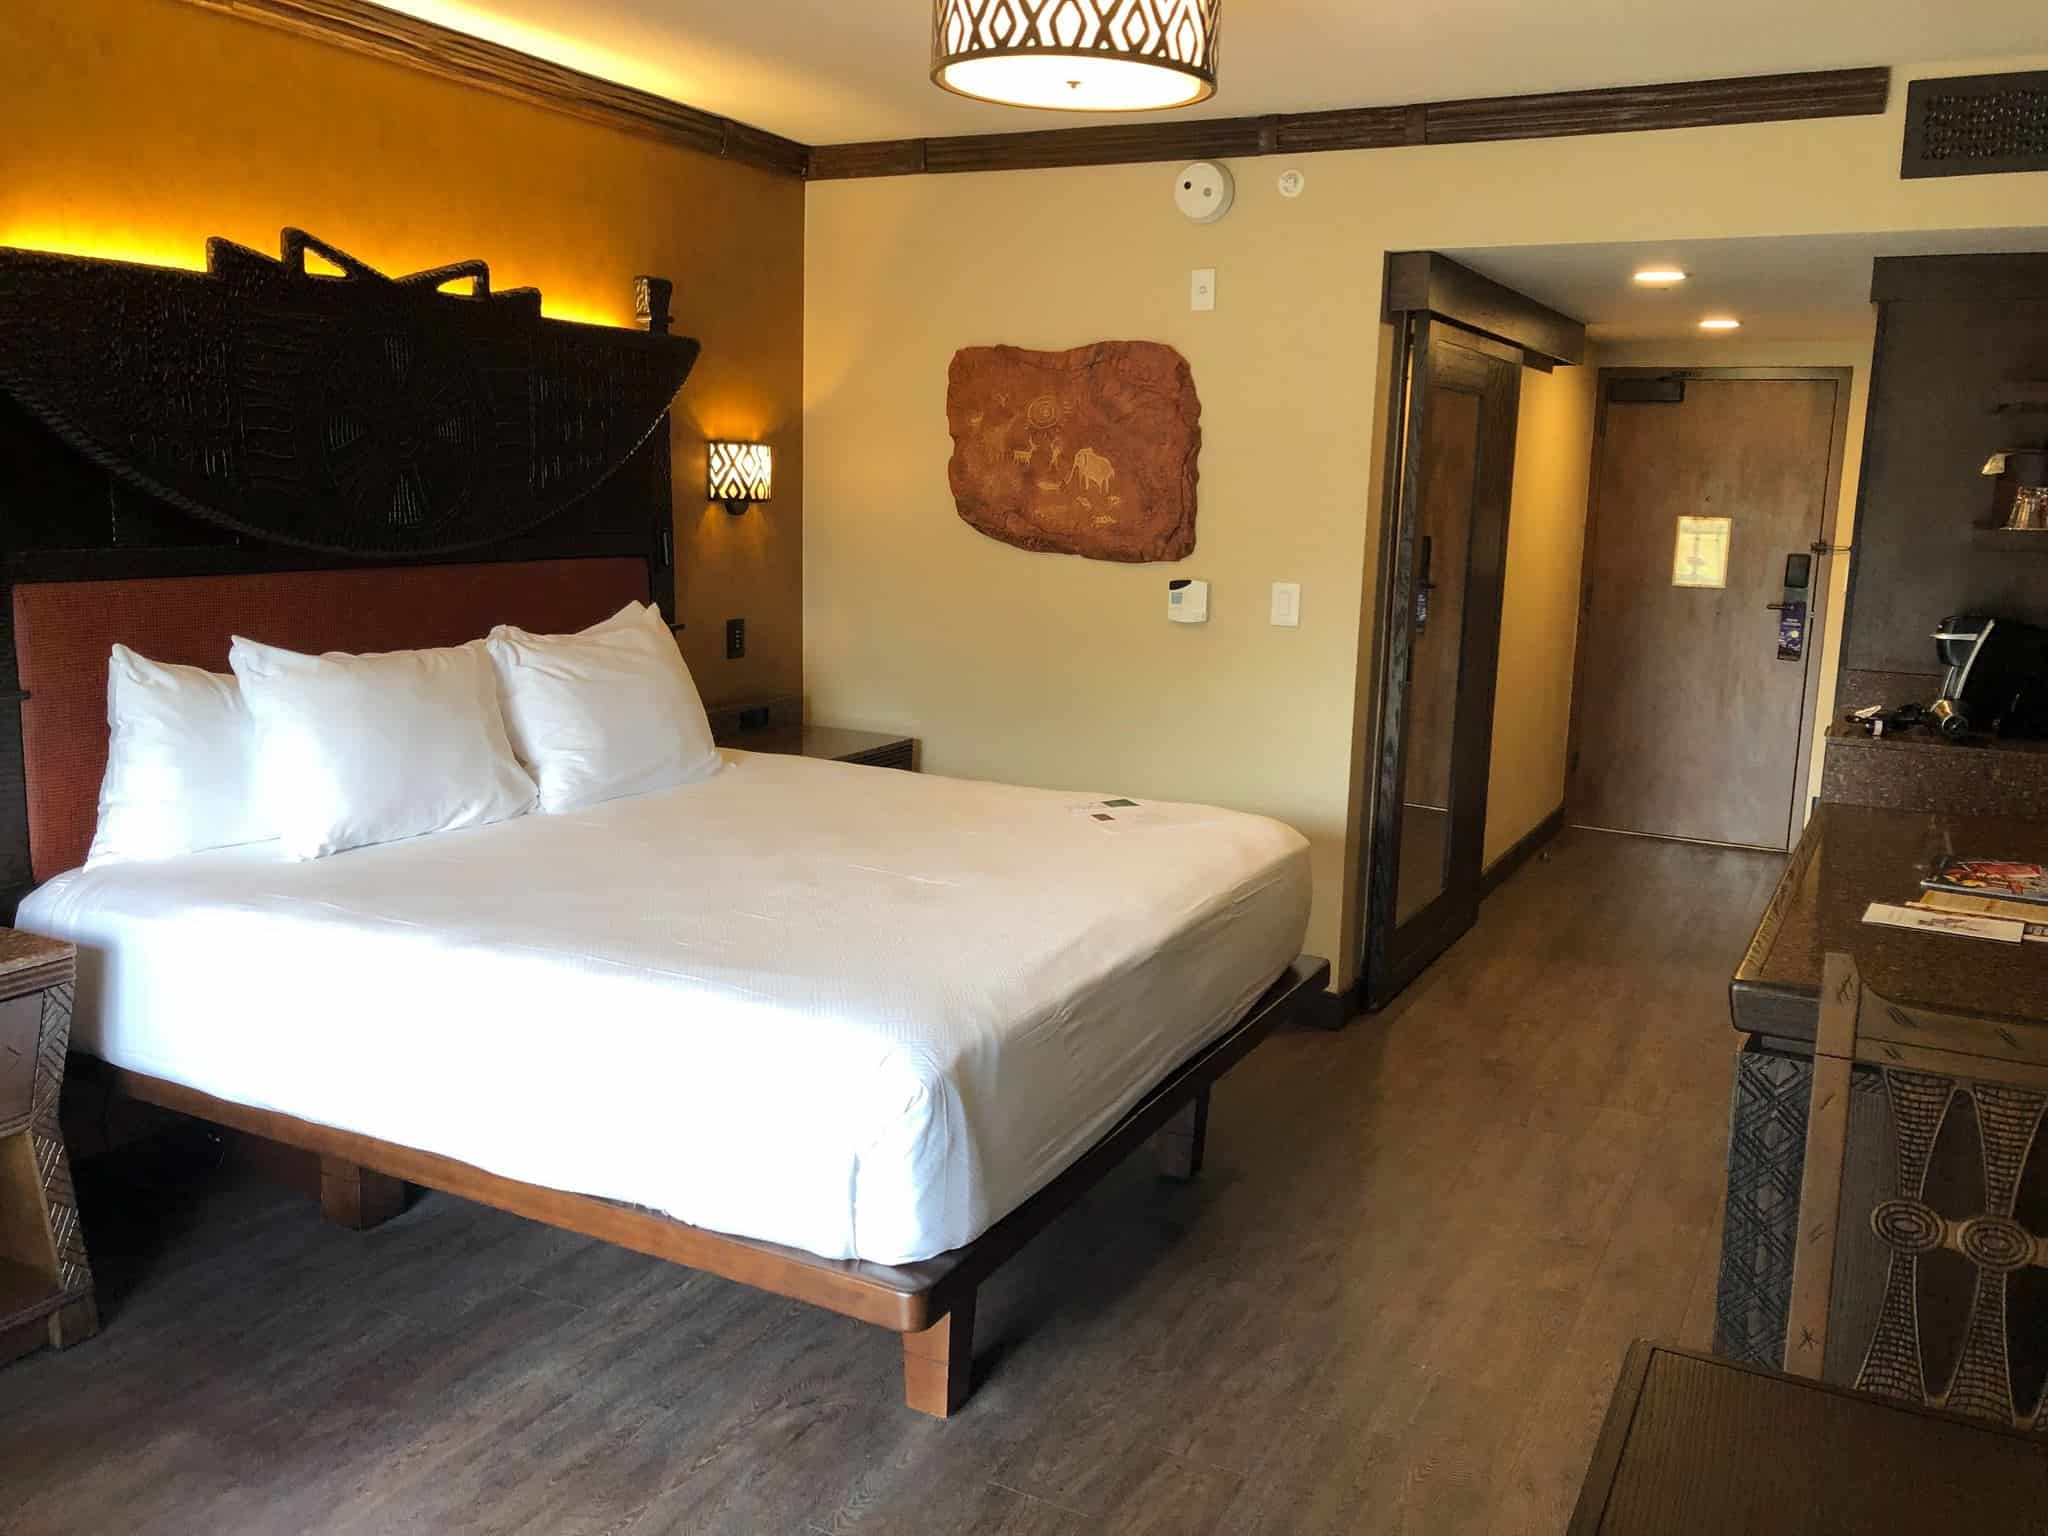 PHOTOS VIDEO Newly Remodeled Rooms Debut at Disney s 